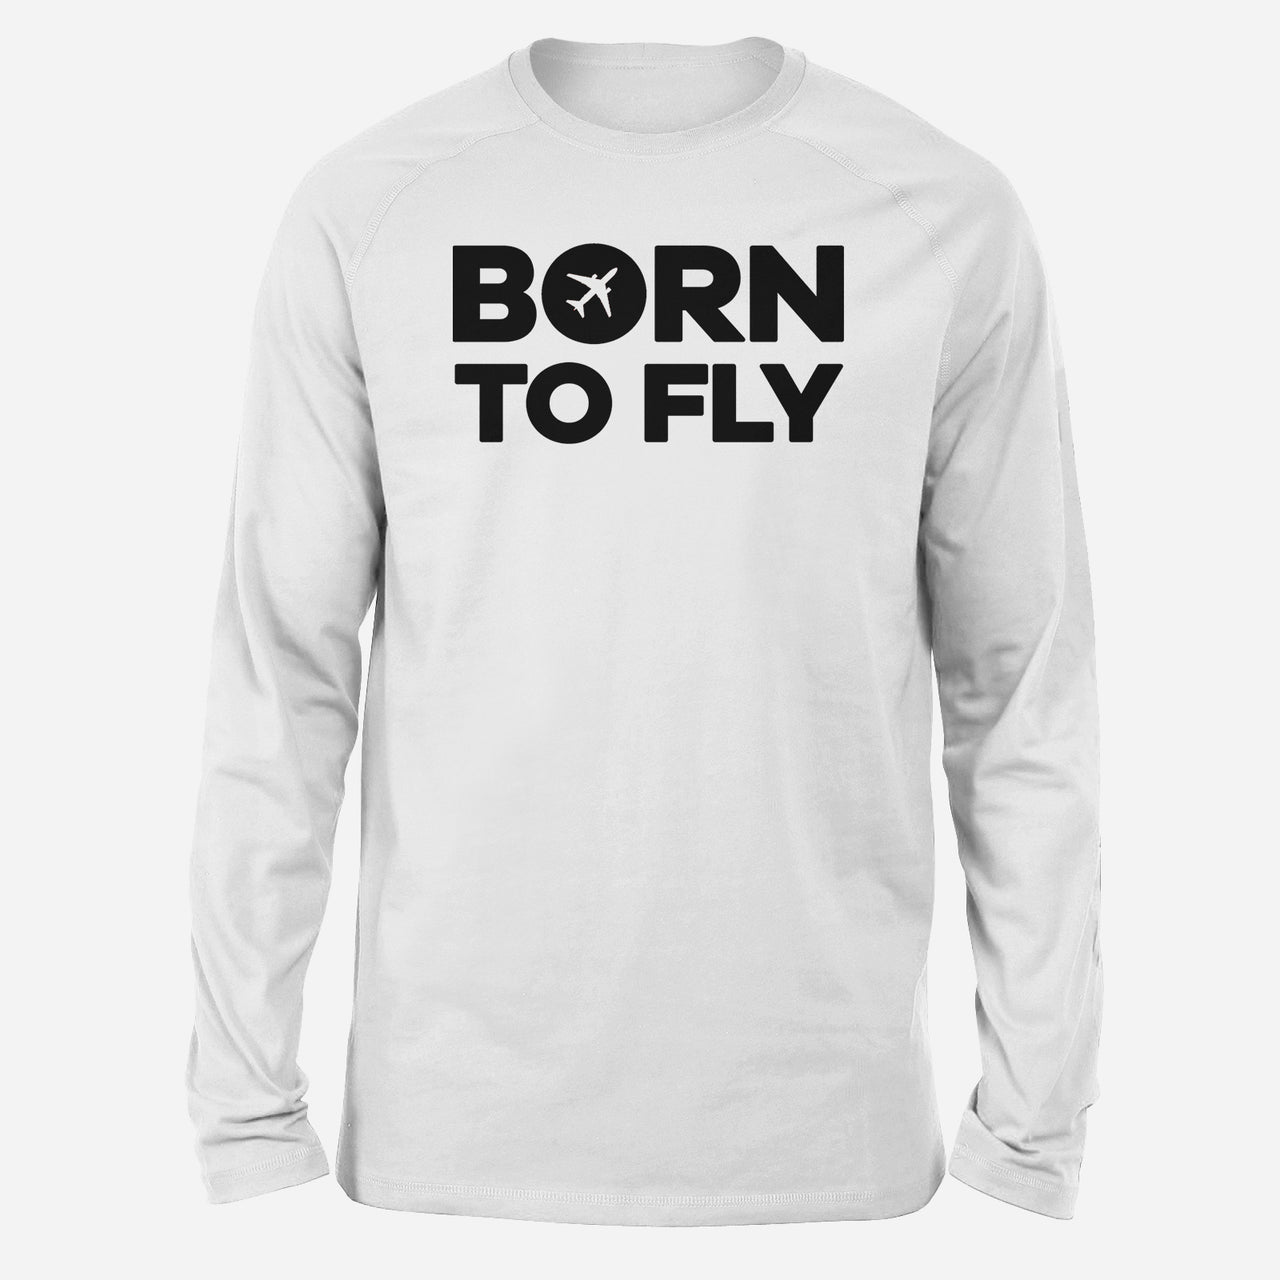 Born To Fly Special Designed Long-Sleeve T-Shirts